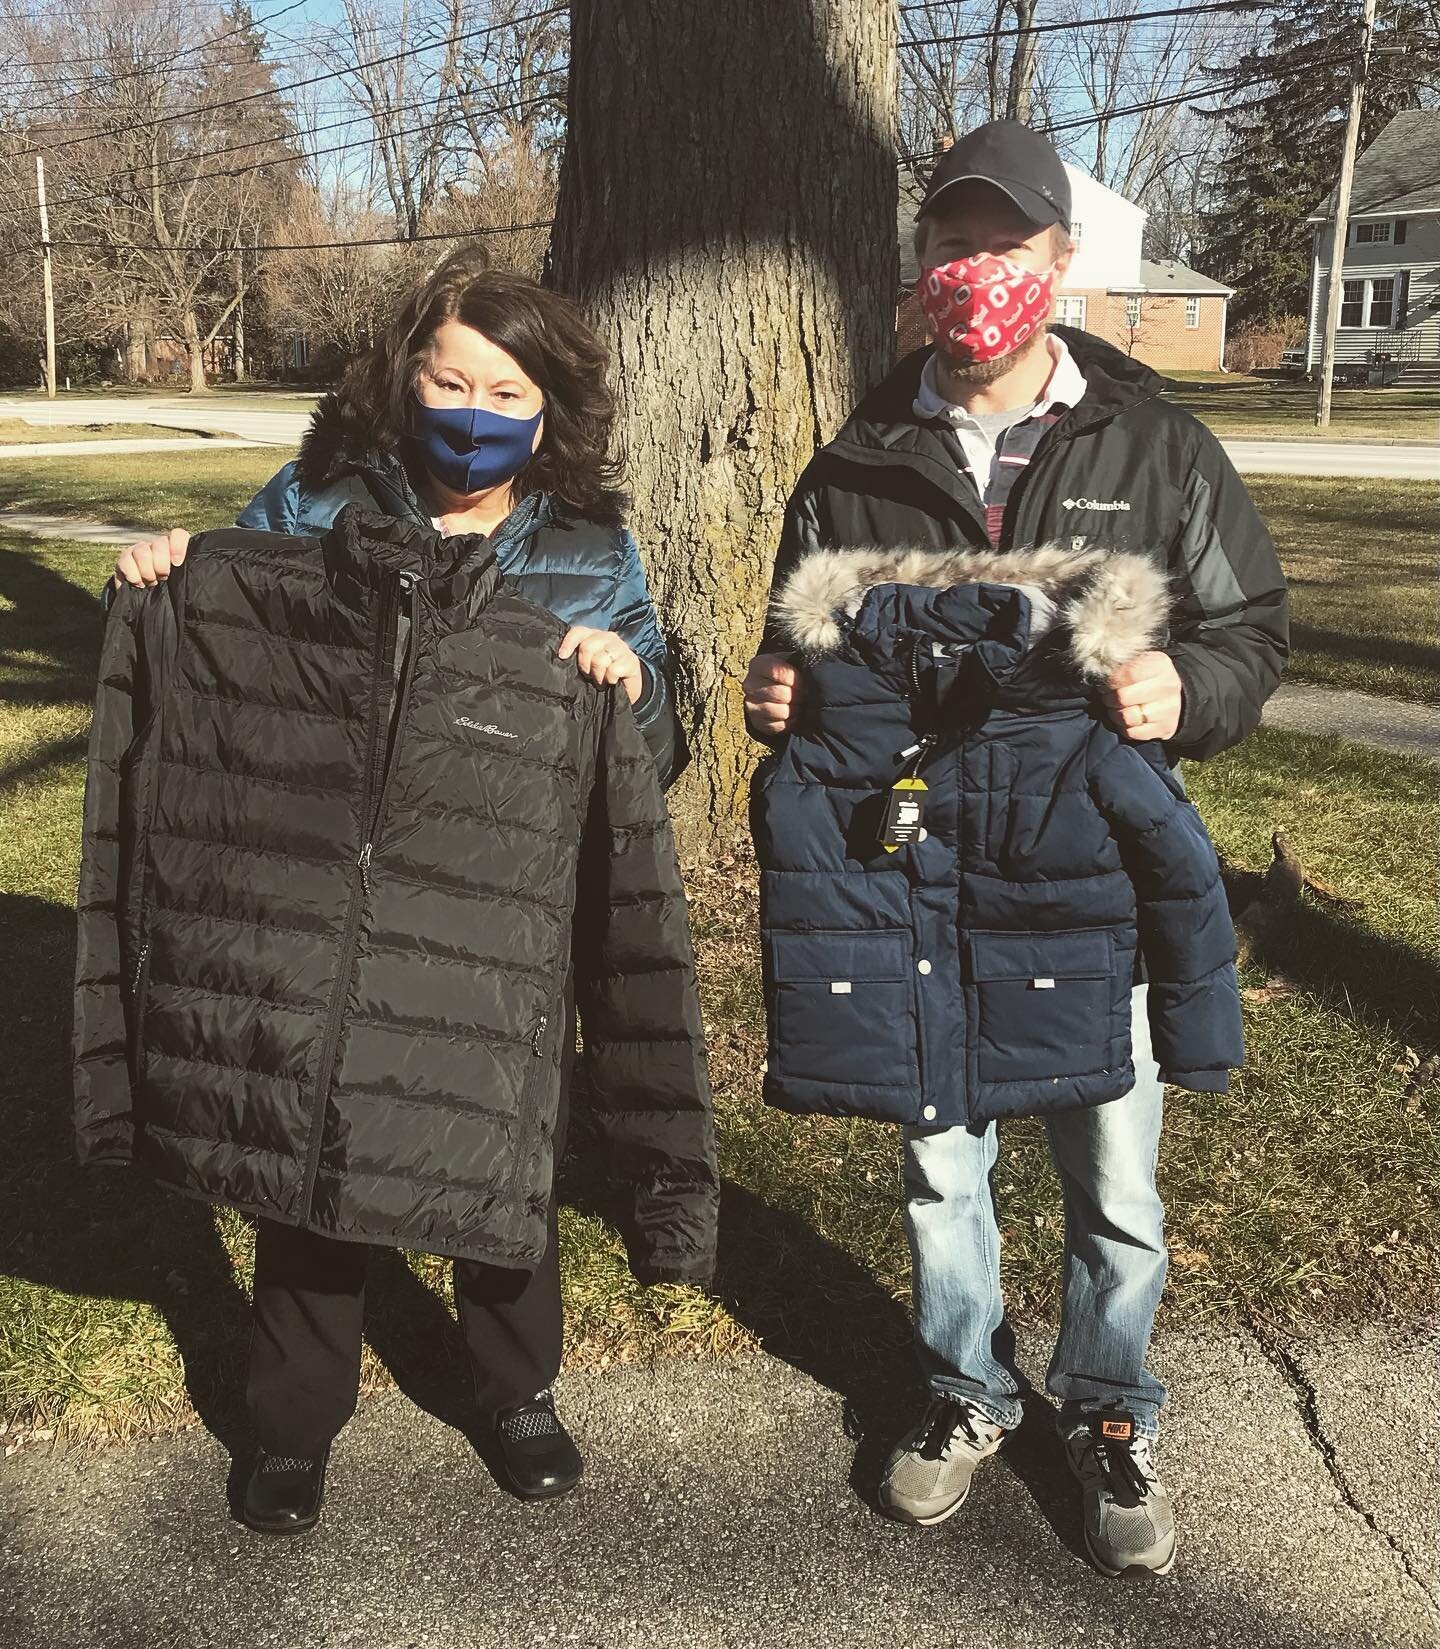 Paul is a savvy shopper!⁣
Today he found these beautiful winter coats for our children for a great price.
⁣
Thank you Paul and Kristi!⁣
They provided over 30 new, warm and cozy coats!⁣
⁣
Wow!!